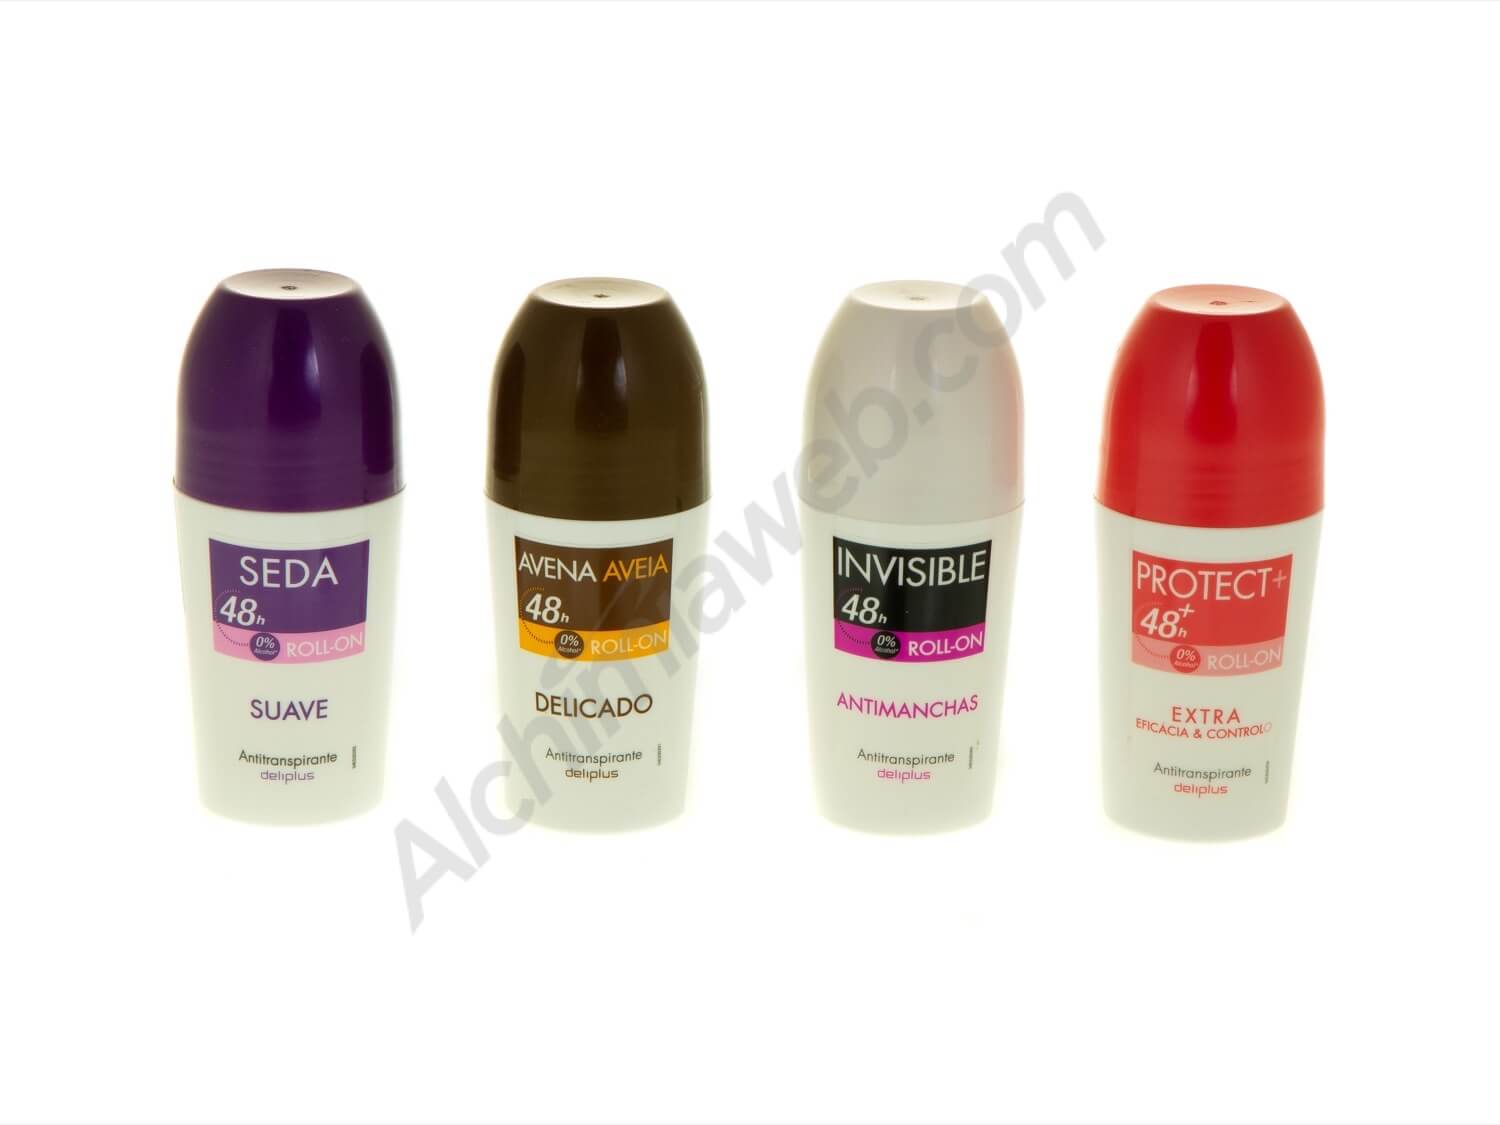 Sale of Concealment Roll-on Deodorant